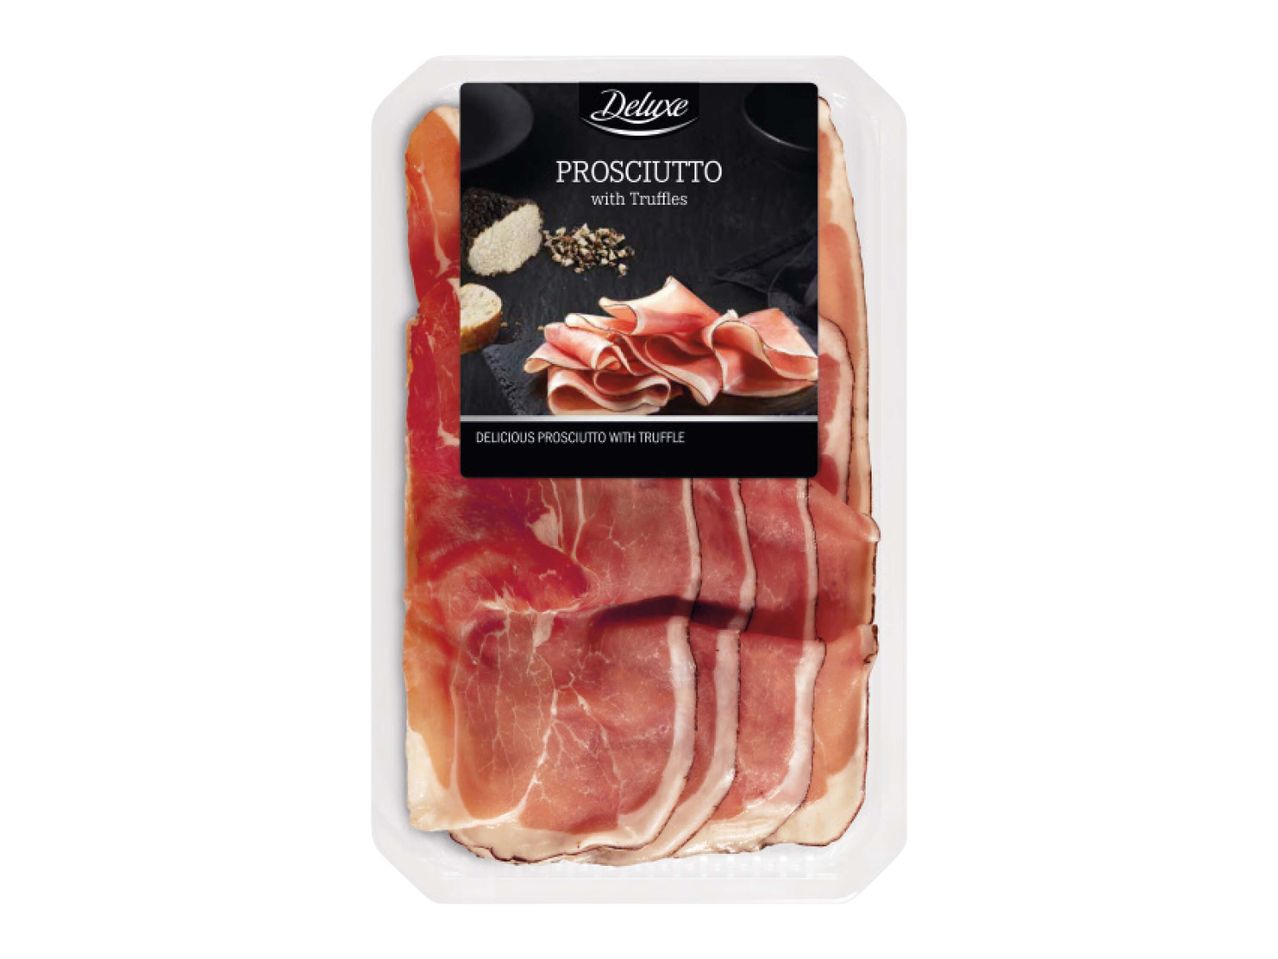 Go to full screen view: Prosciutto With Truffle - Image 1